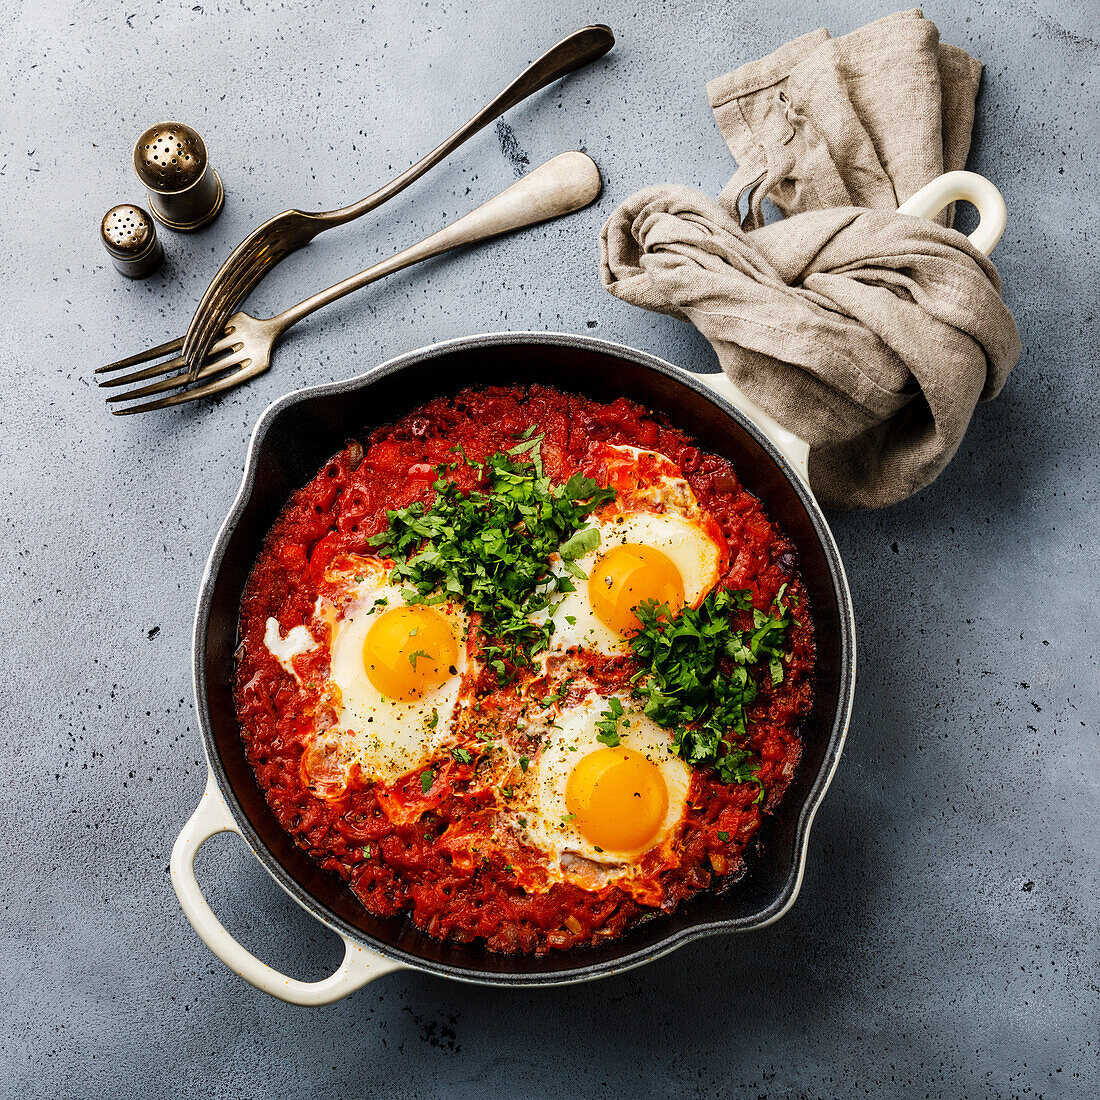 Breakfast shakshuka fried eggs with tomatoes in a pan against a concrete background